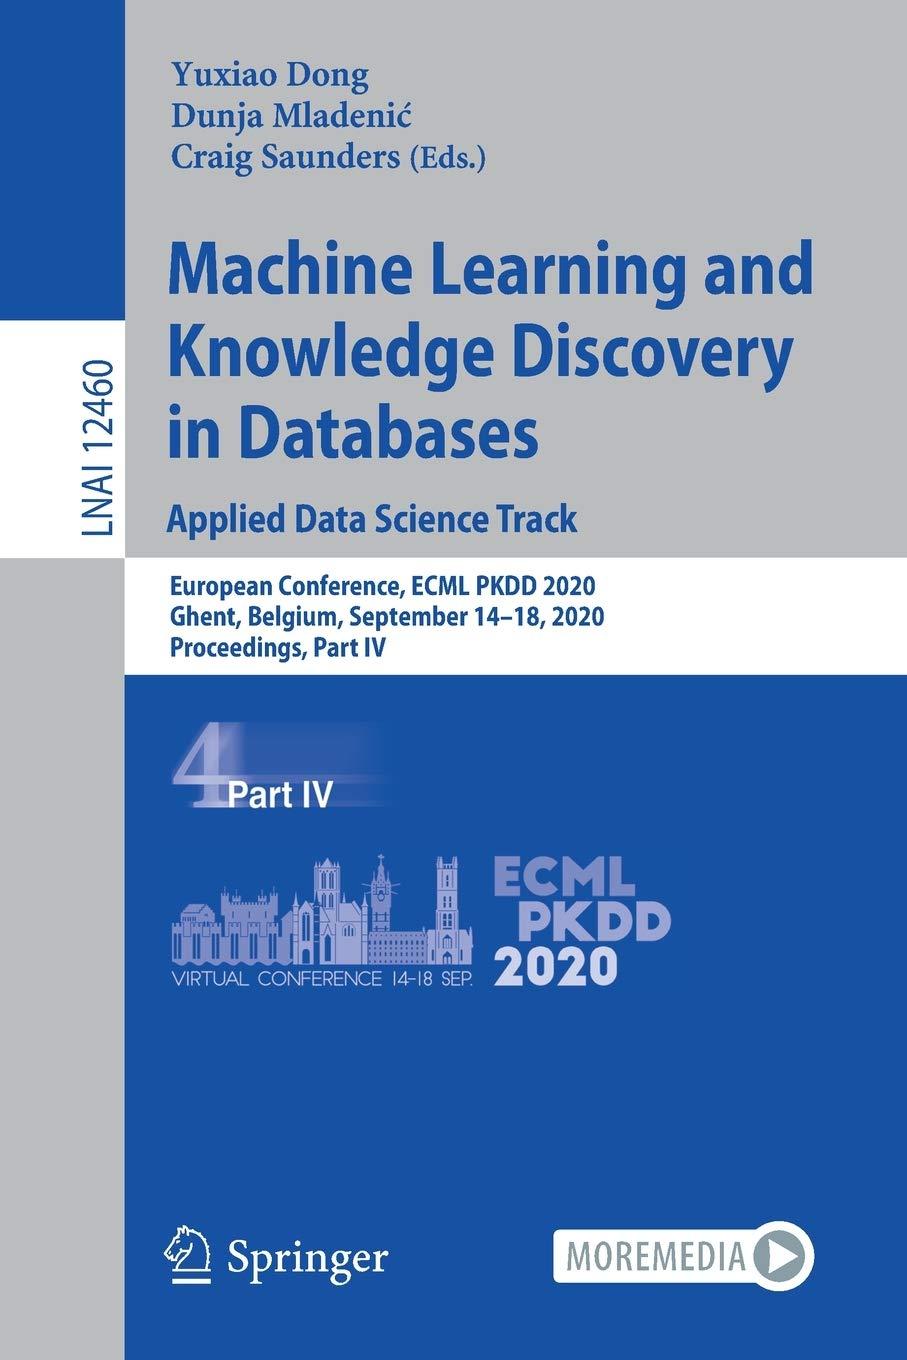 Machine Learning And Knowledge Discovery In Databases Applied Data Science Track  European Conference  ECML PKDD 2020  Ghent  Belgium Part 4